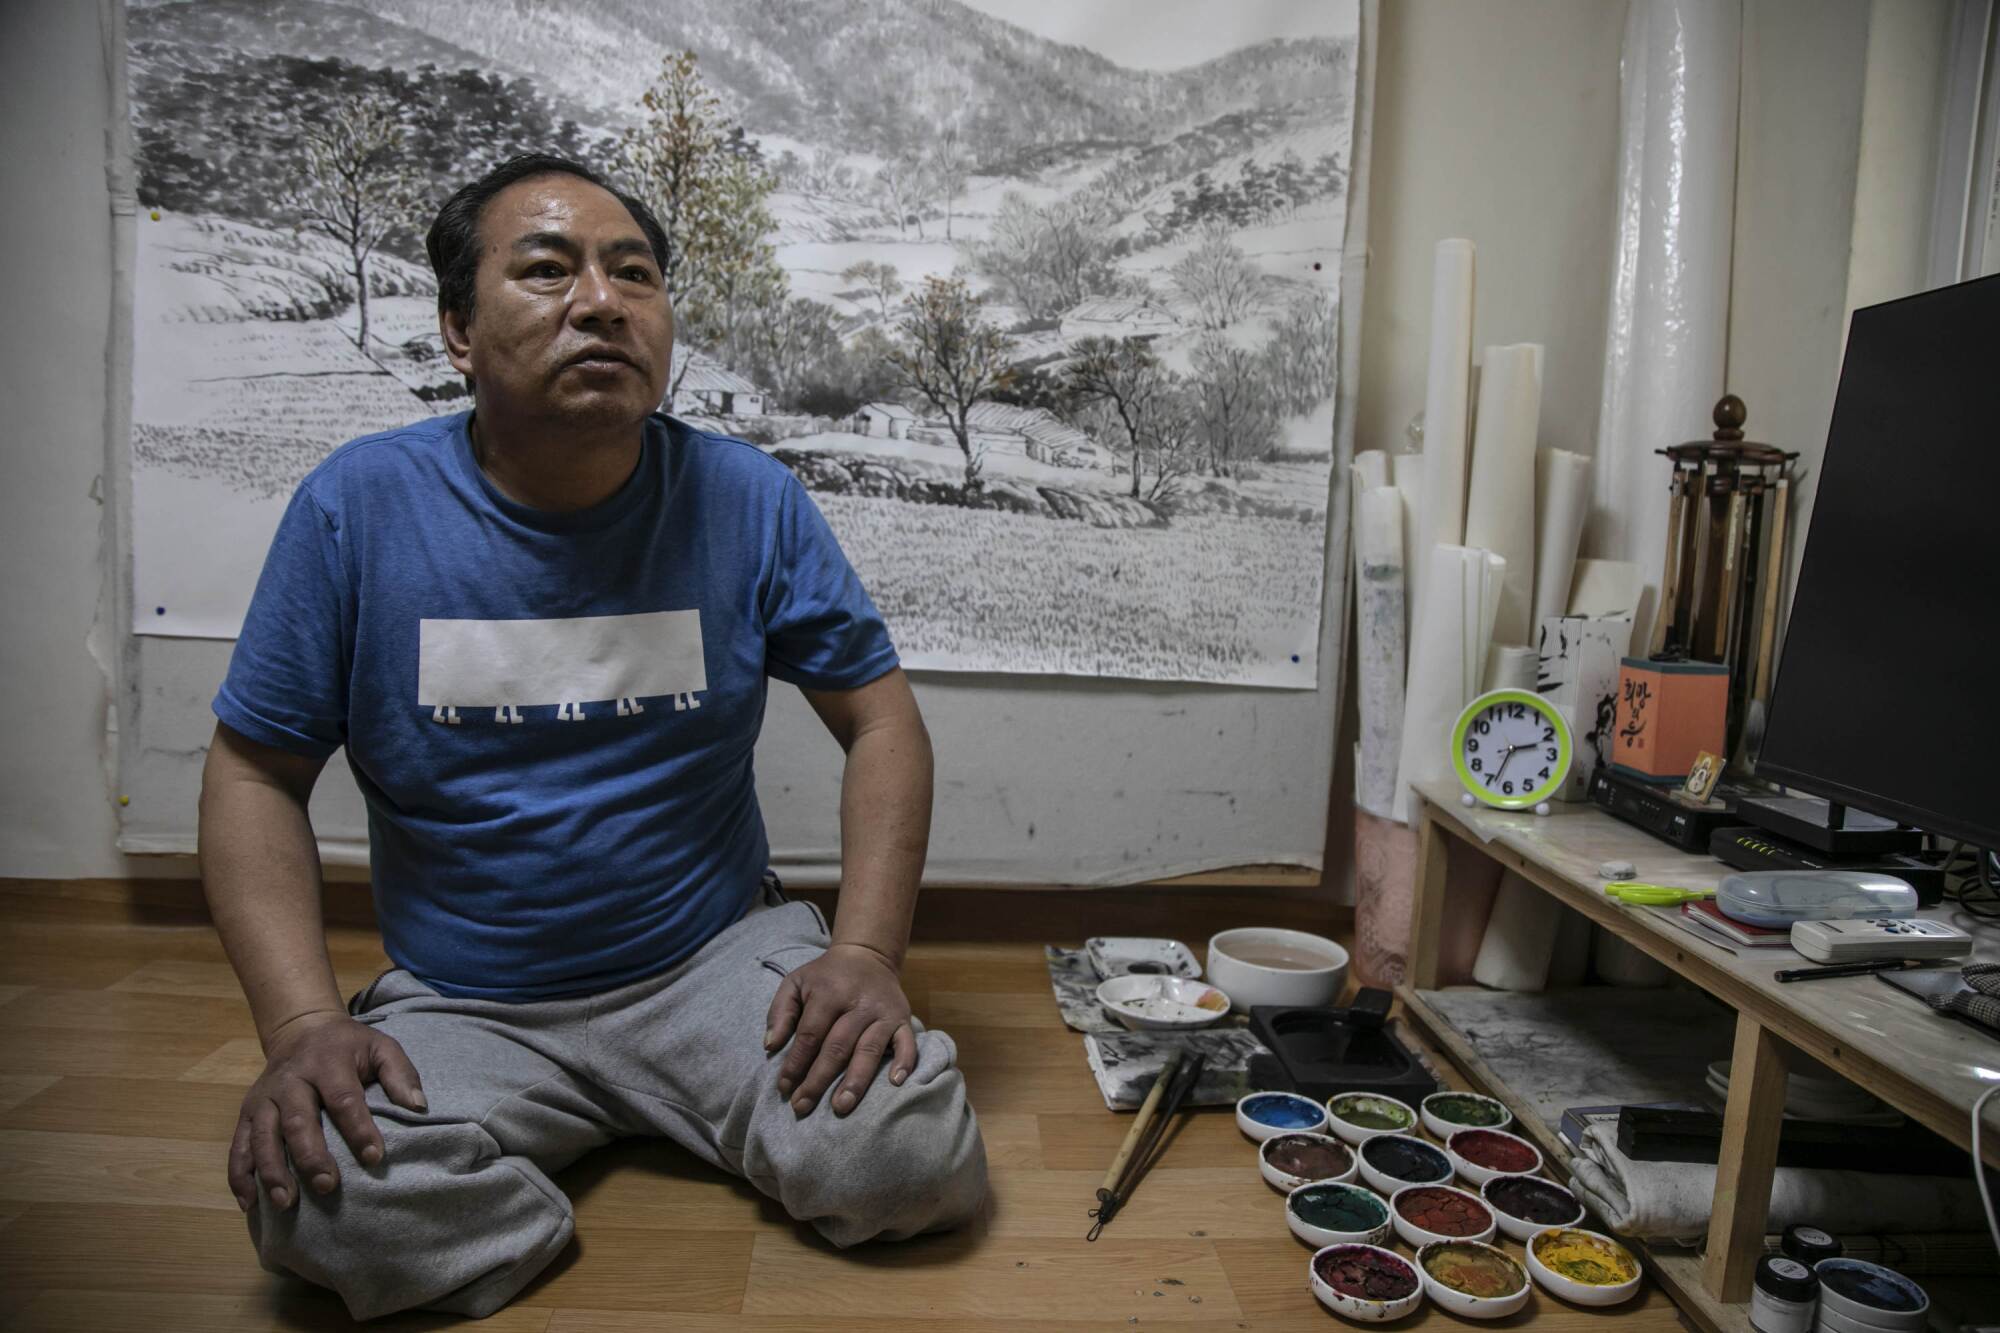 Mr. Yoon Yong-ju, representative of the neighborhood community center in Jjokbangchon in Dongja-dong, sits in his room